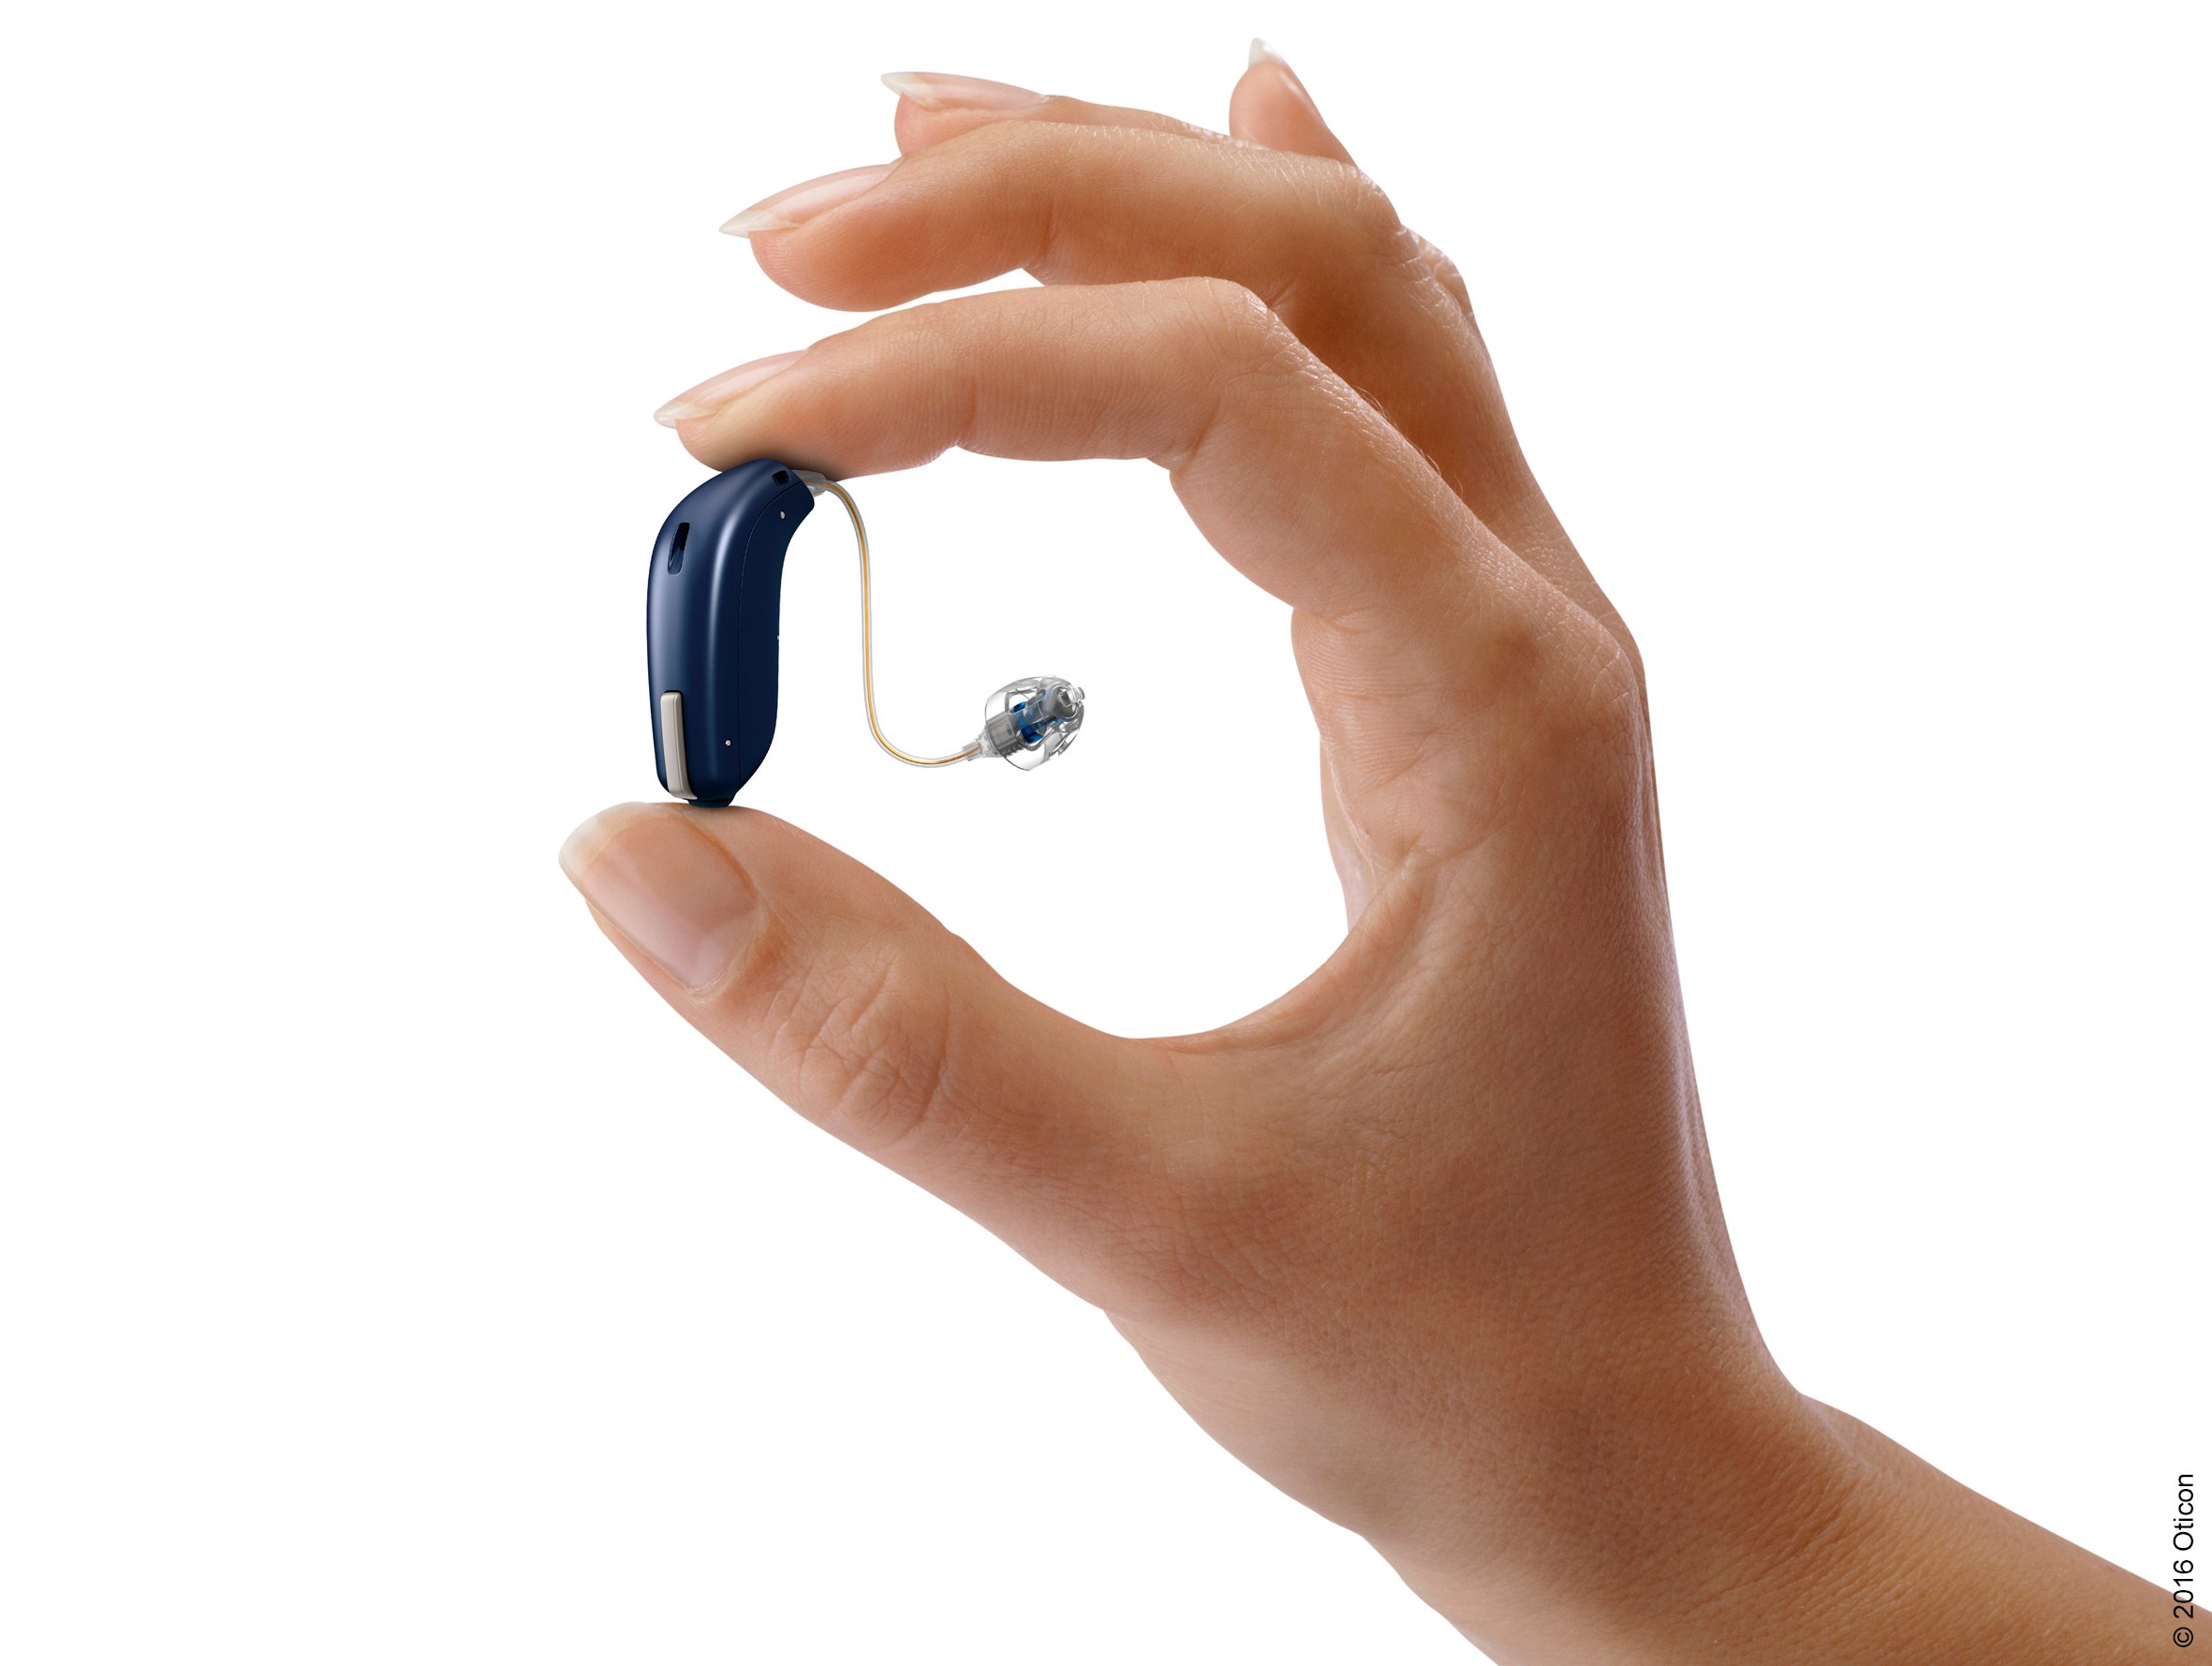 Using Oticon Opn hearing aids with iPad and iPhone